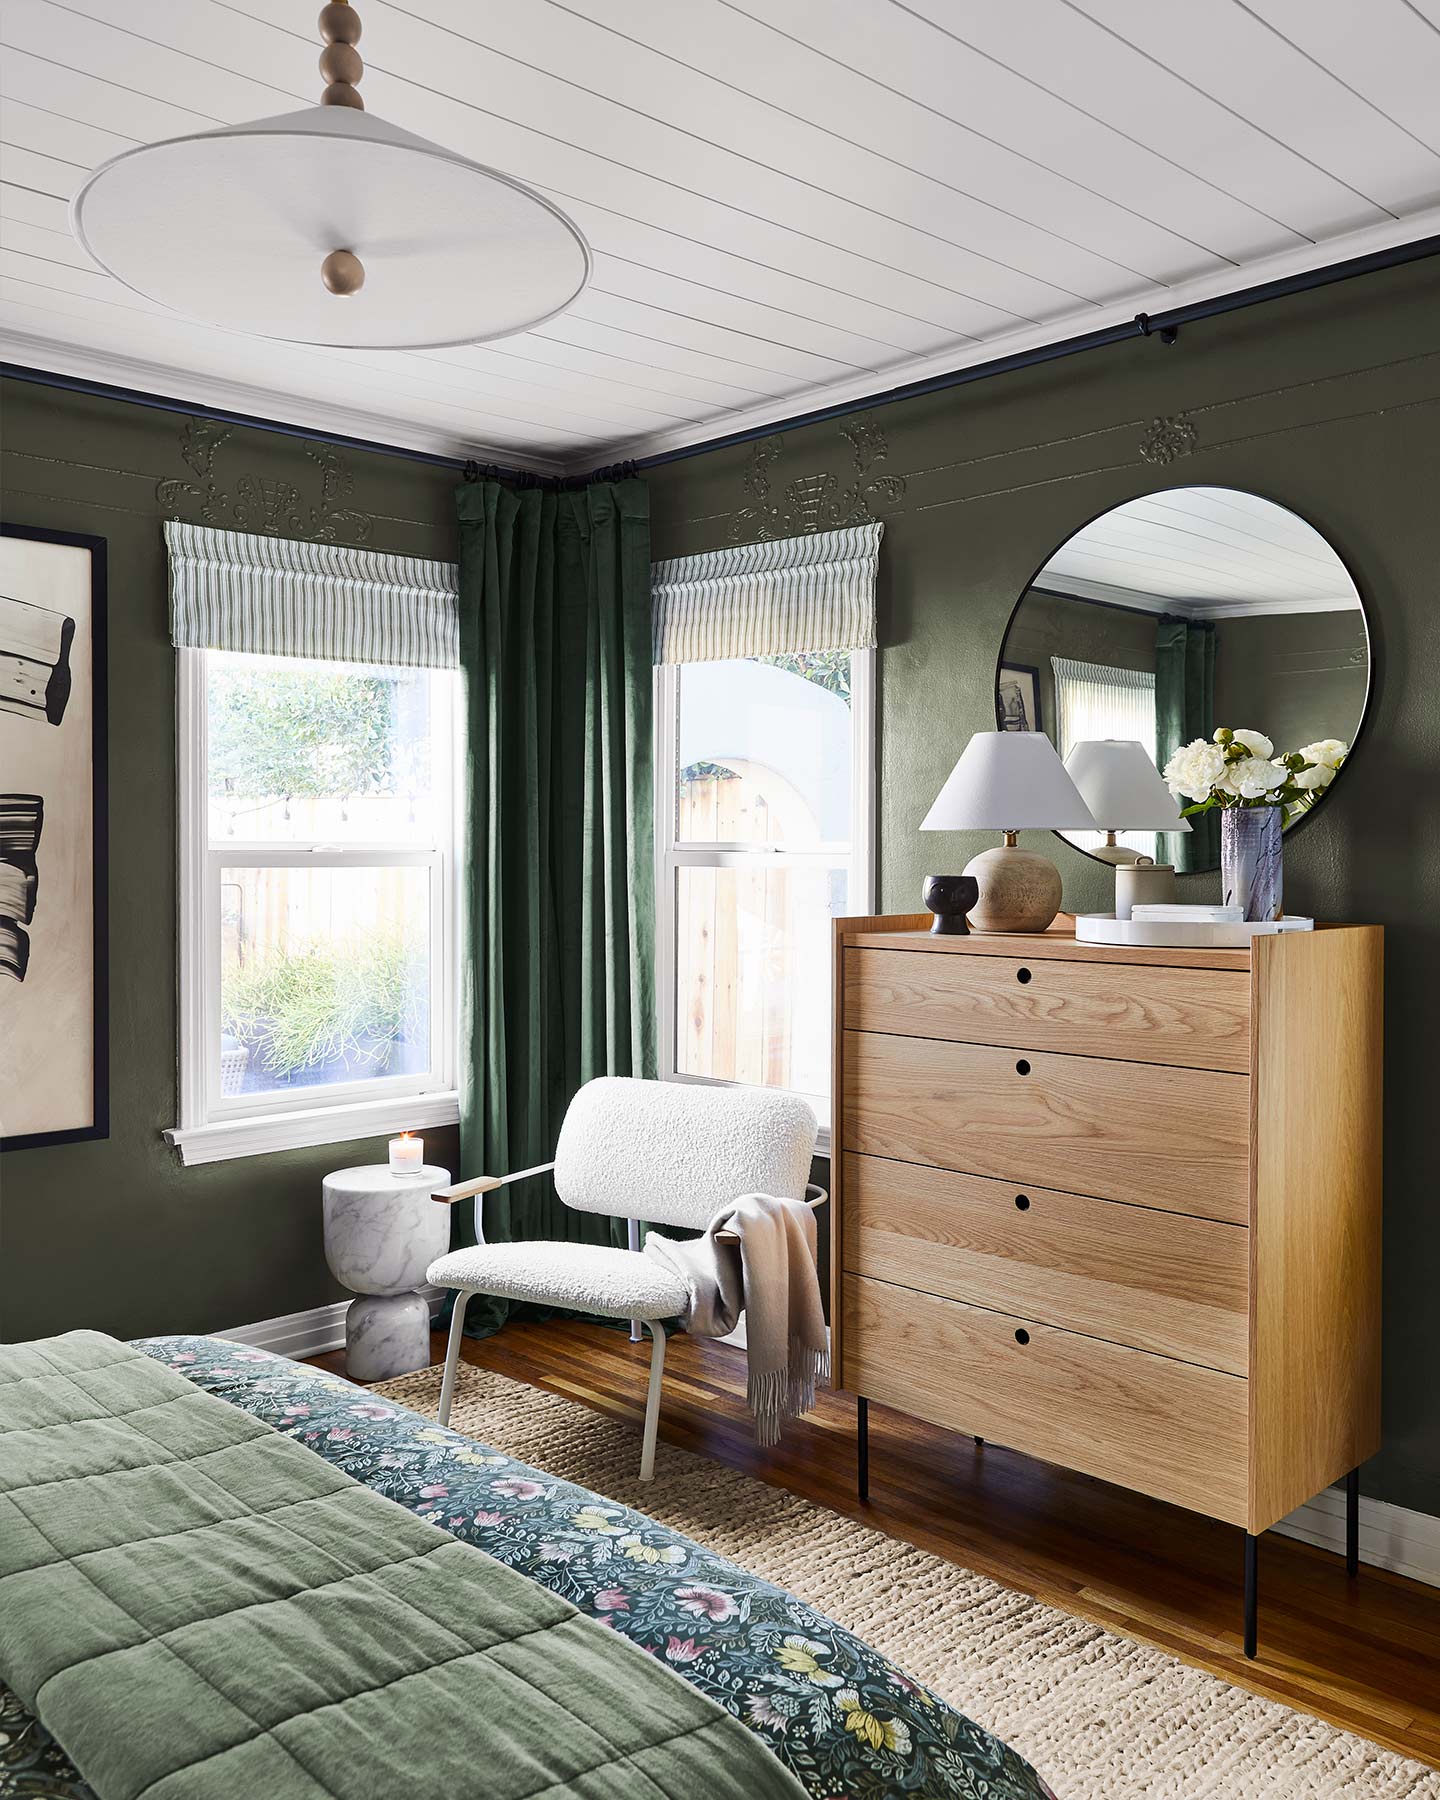 A little color never hurt anyone. Try a dark green bedroom for a relaxing-yet-unexpected vibe.